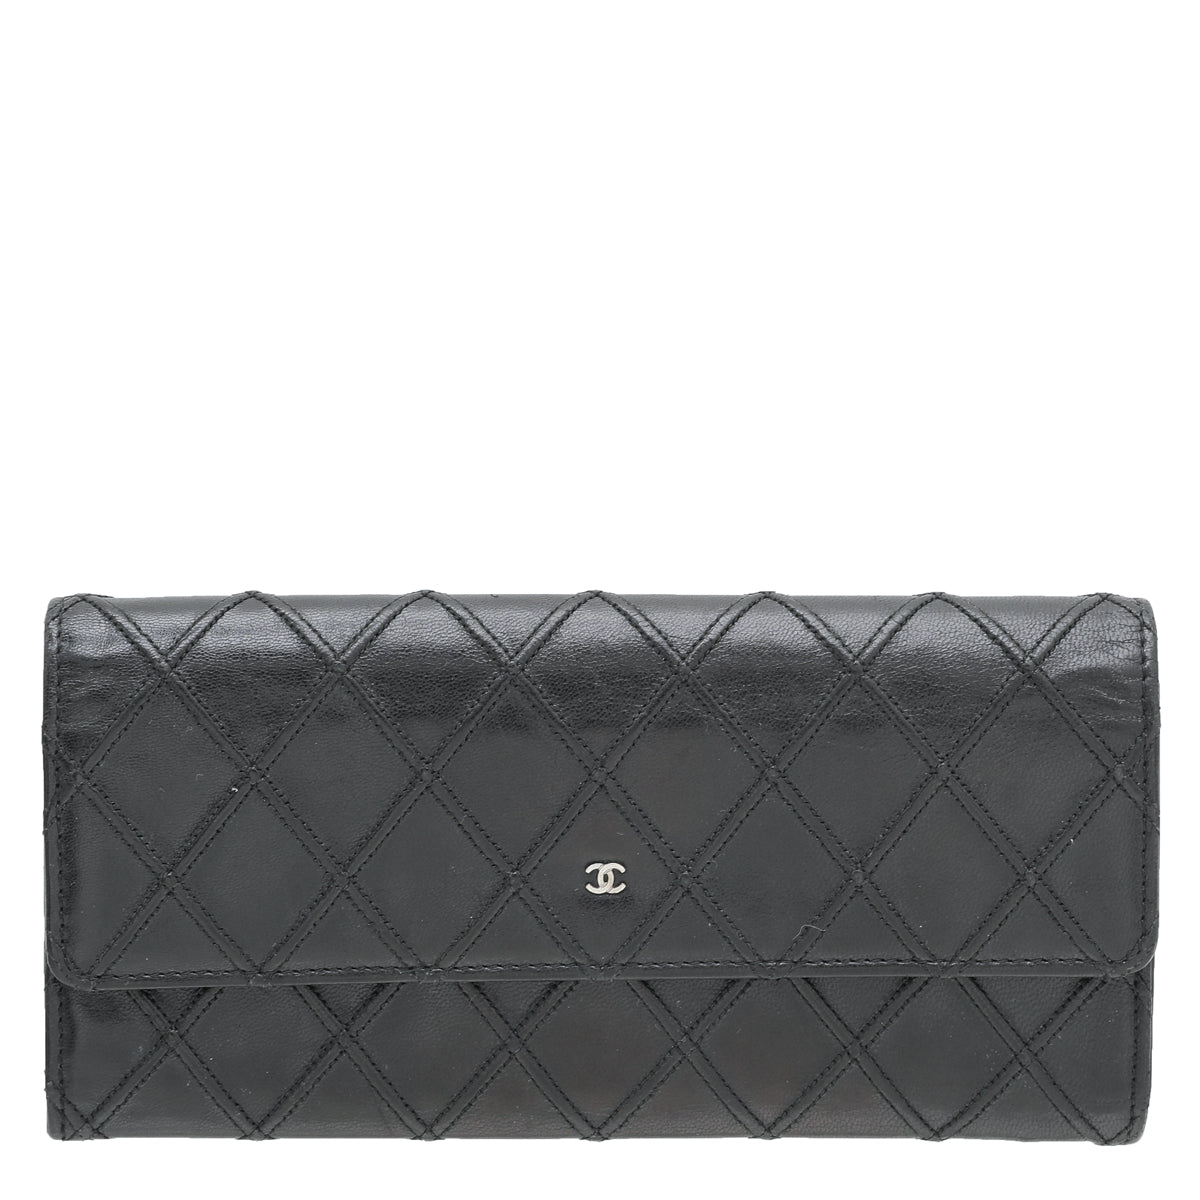 Chanel Black CC Diamond Quilted Flap Wallet